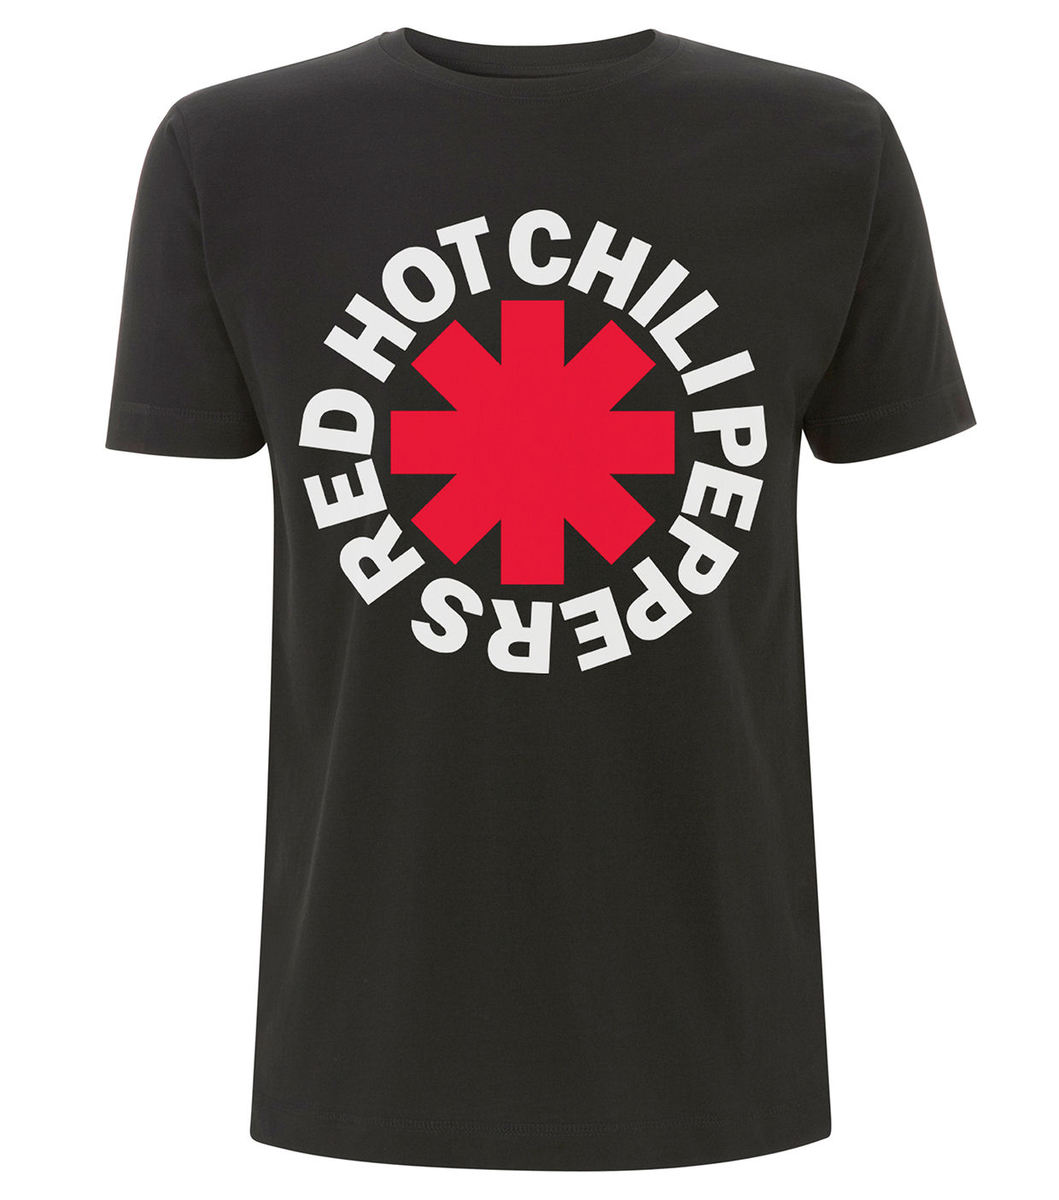 Red Hot Chili Peppers - Classic Asterisk (Large)